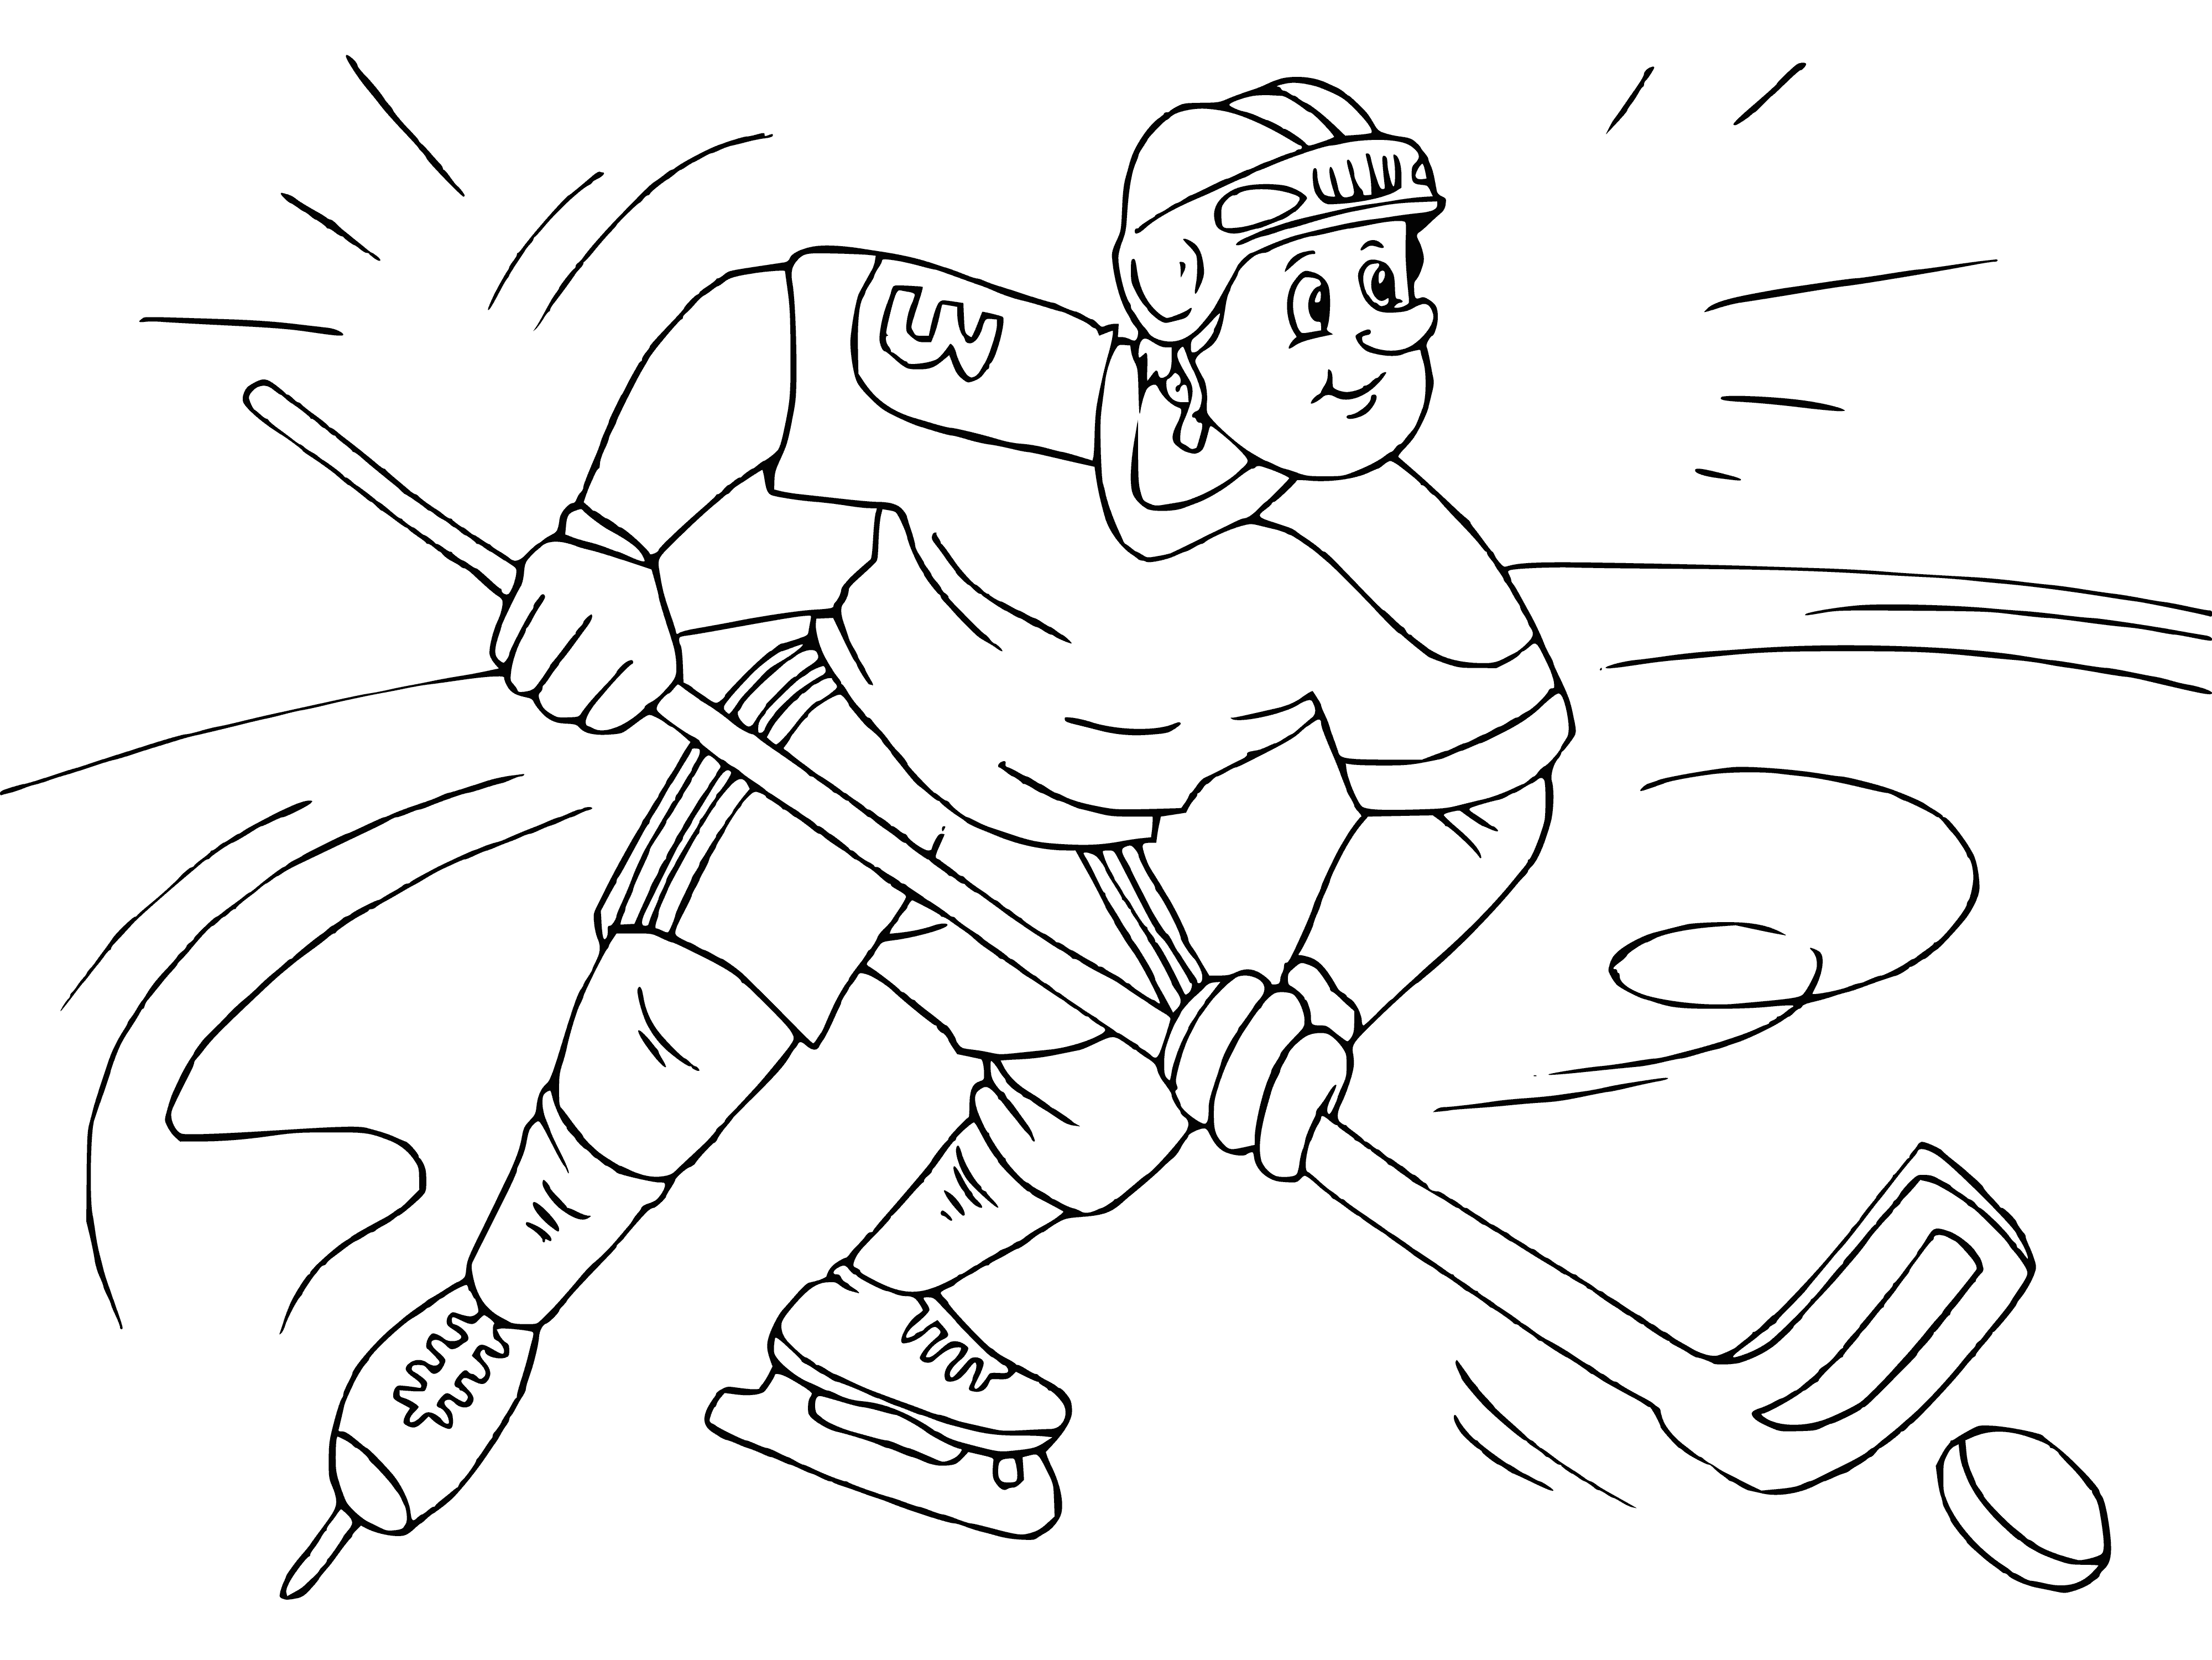 coloring page: Coloring page of hockey player skating on ice with black helmet, gloves, jersey, stick, and puck.